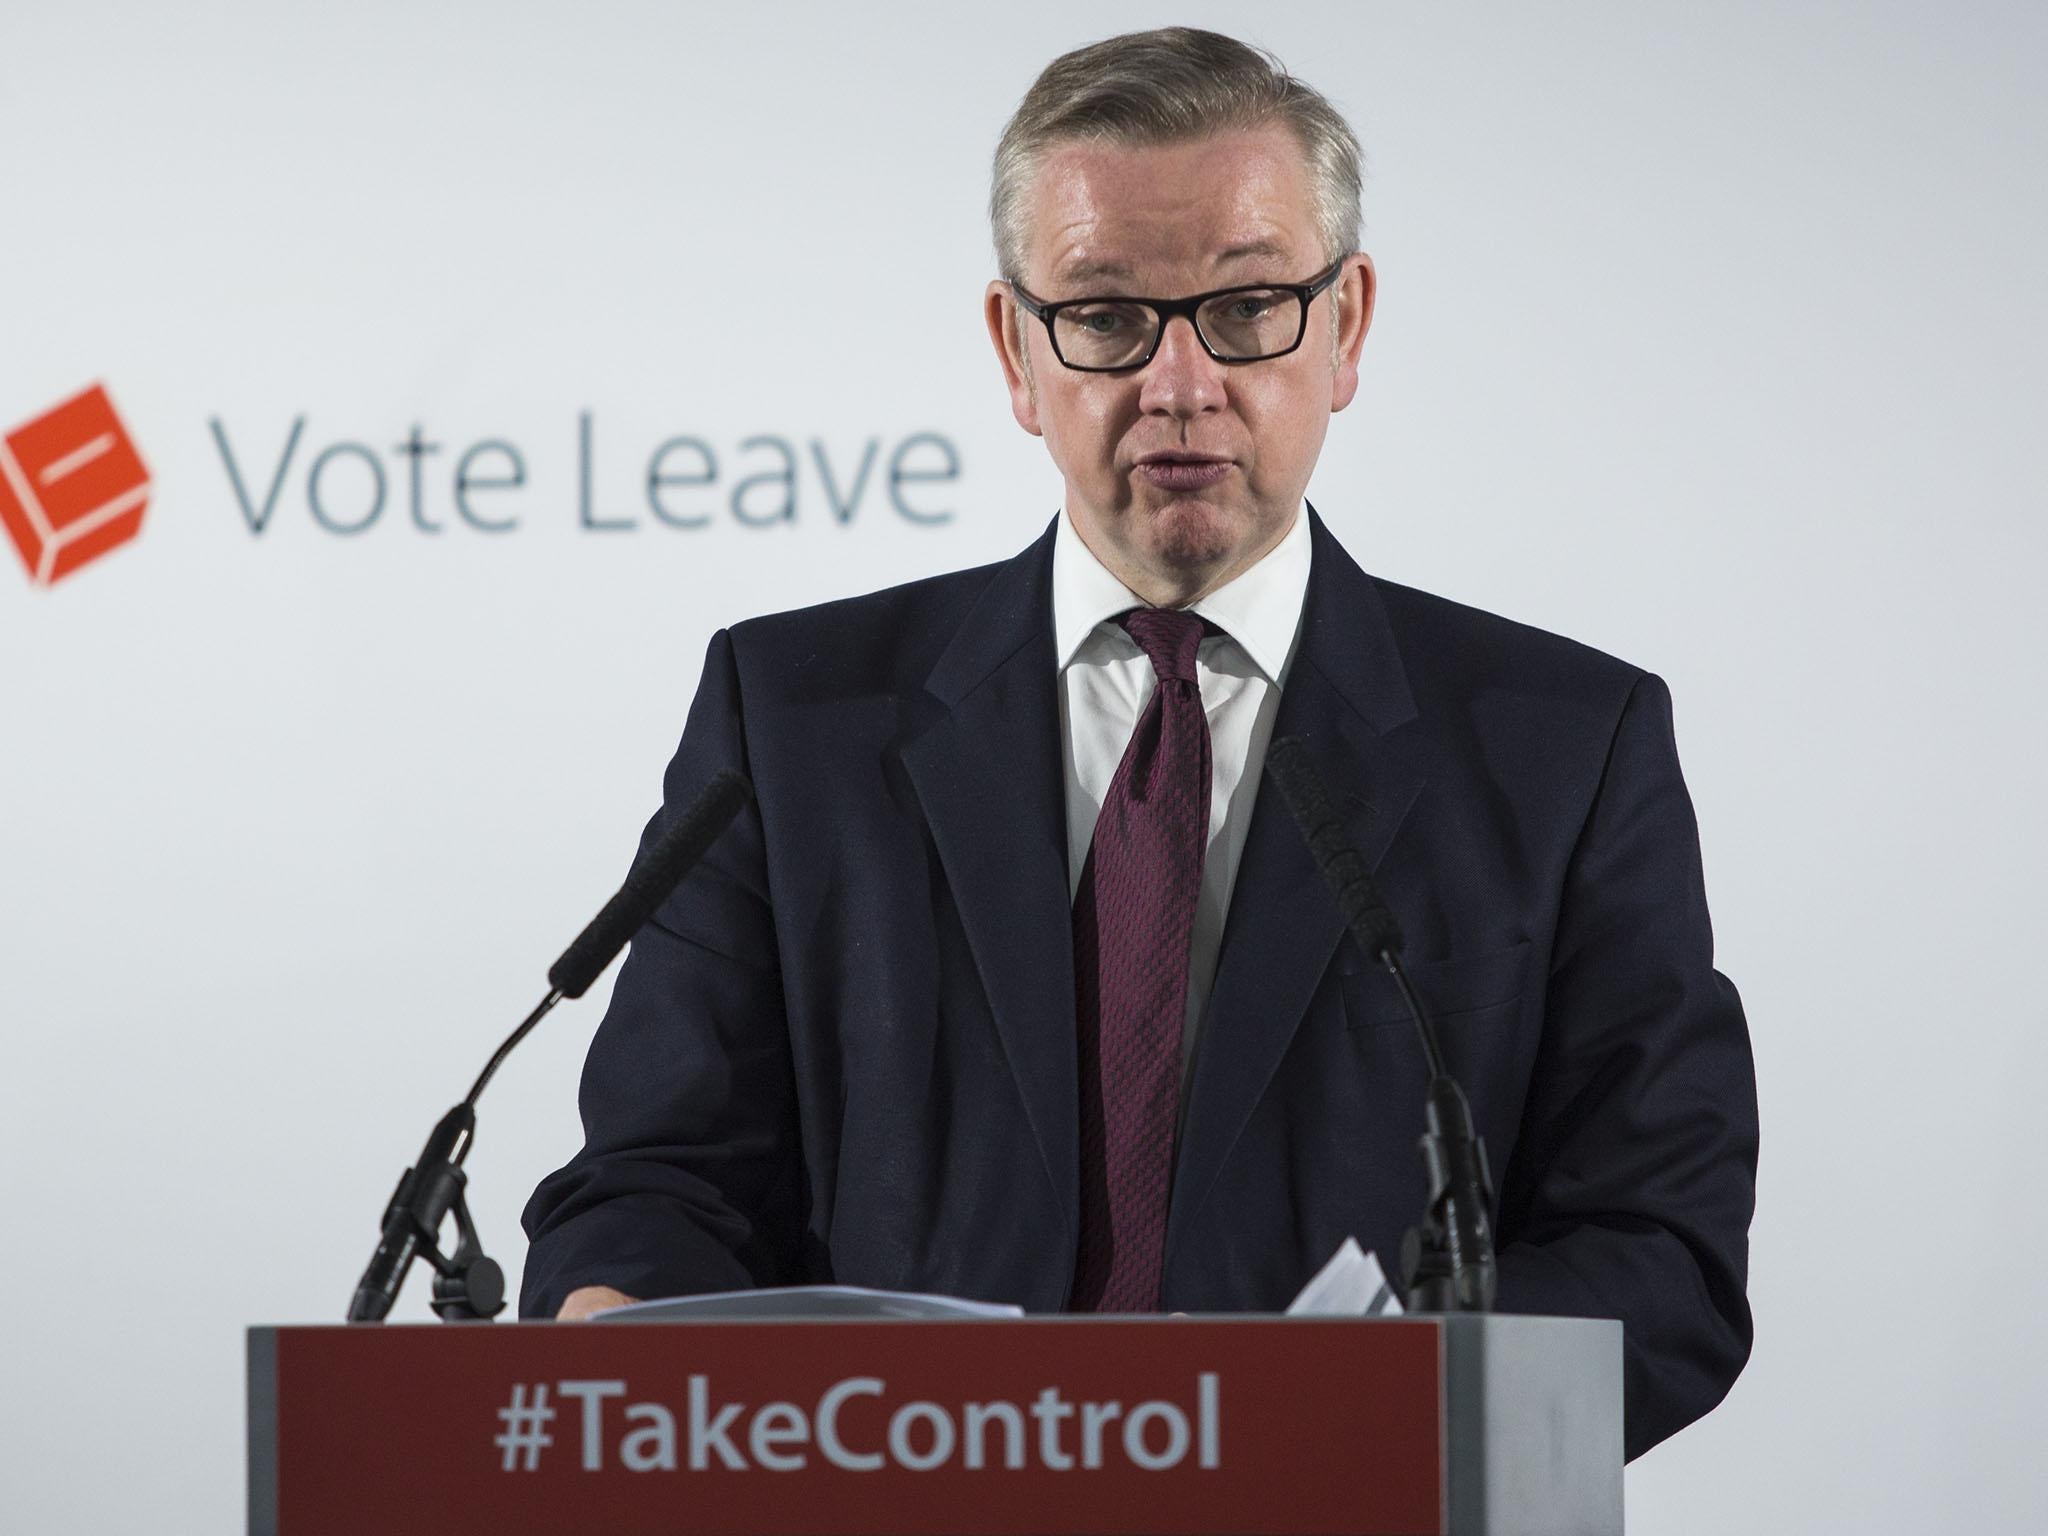 Gove argued that ‘people have had enough of experts’ – mainly because they disagreed with him